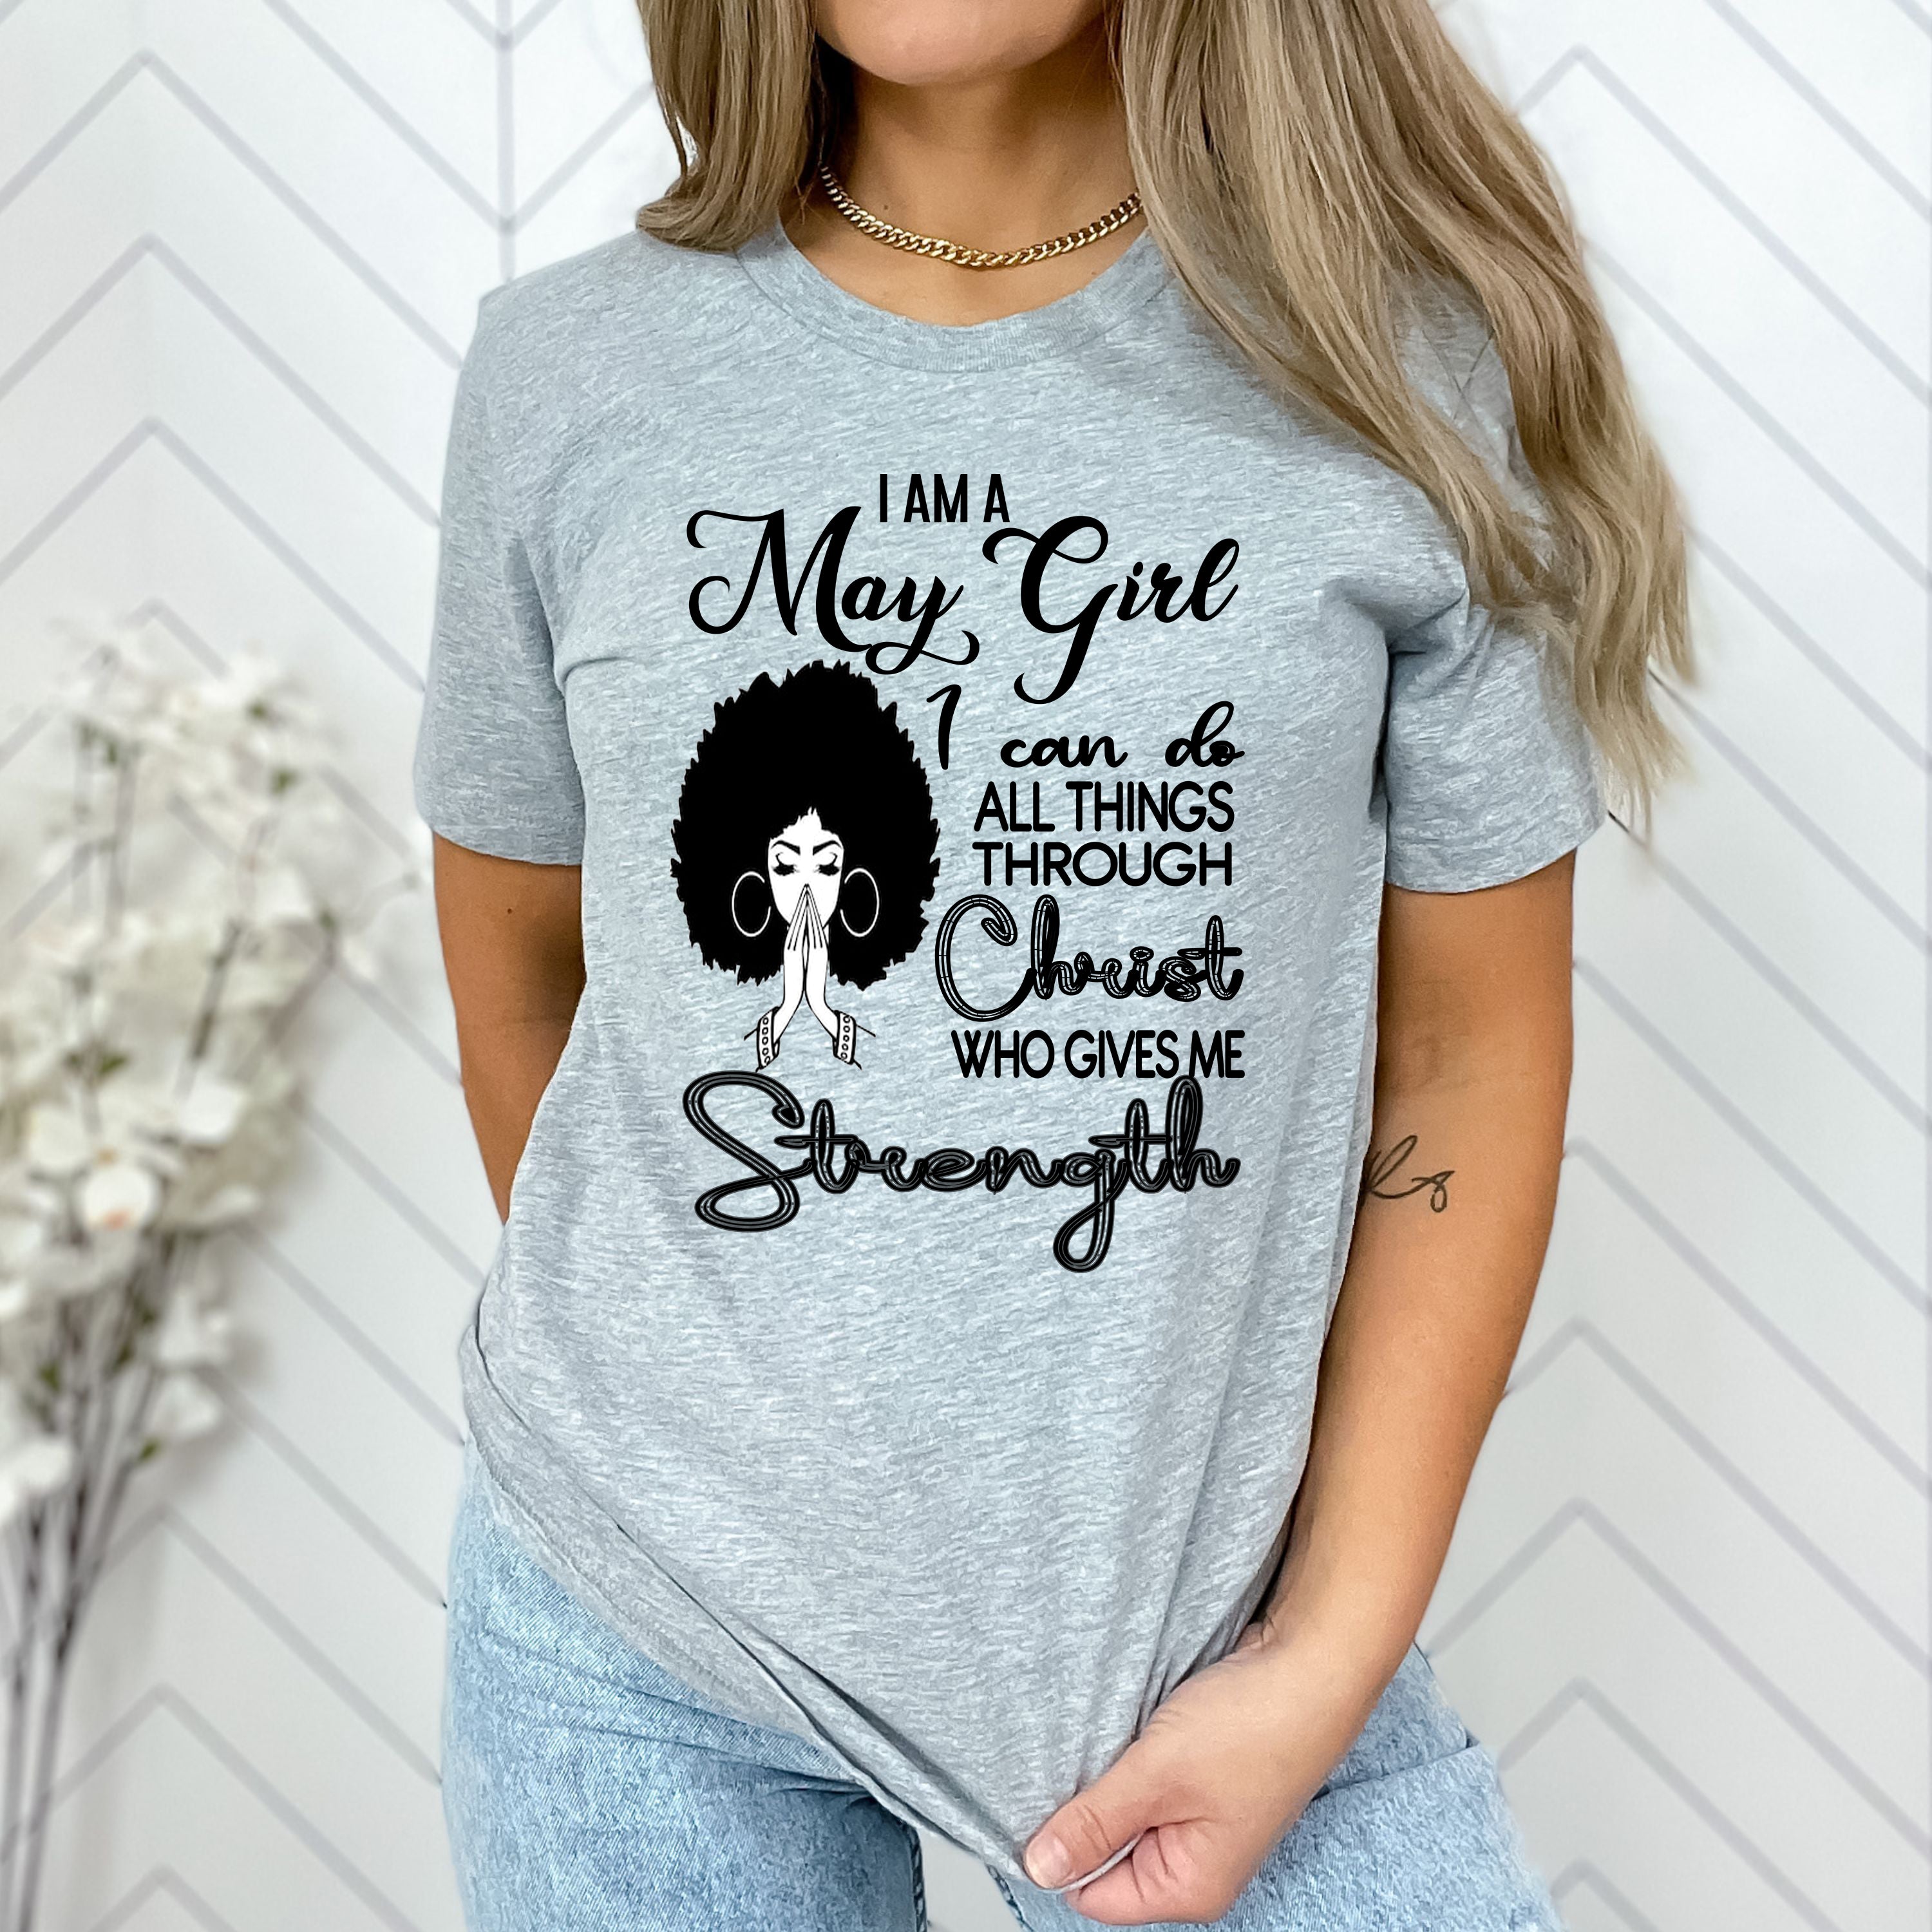 "MAY GIRL Can Do All Things Through Christ Who Gives Me Strength",T-Shirt.